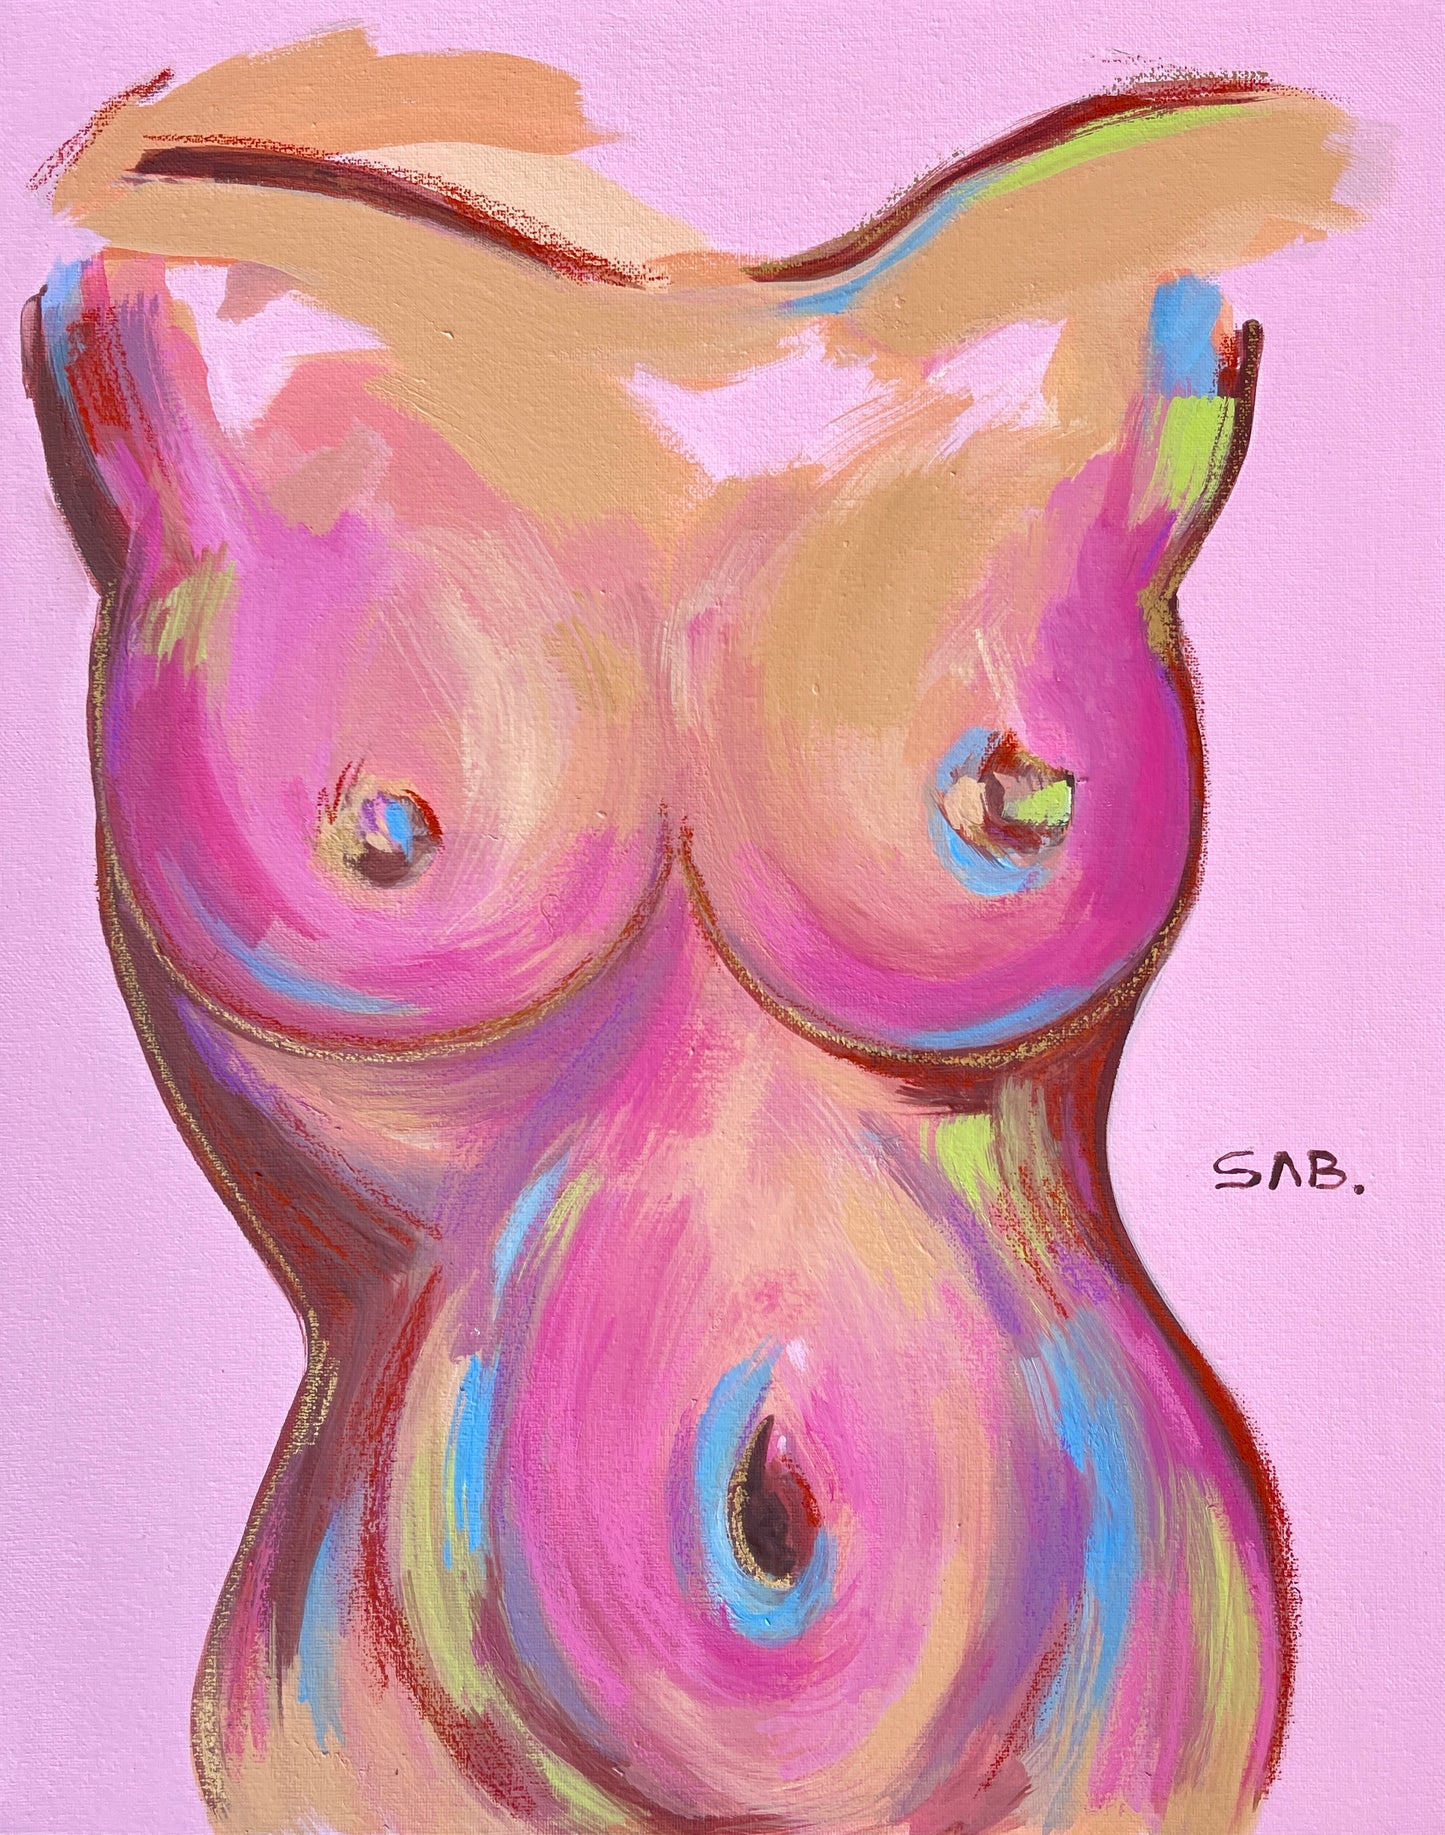 “J” abstract figurative female body painting art print